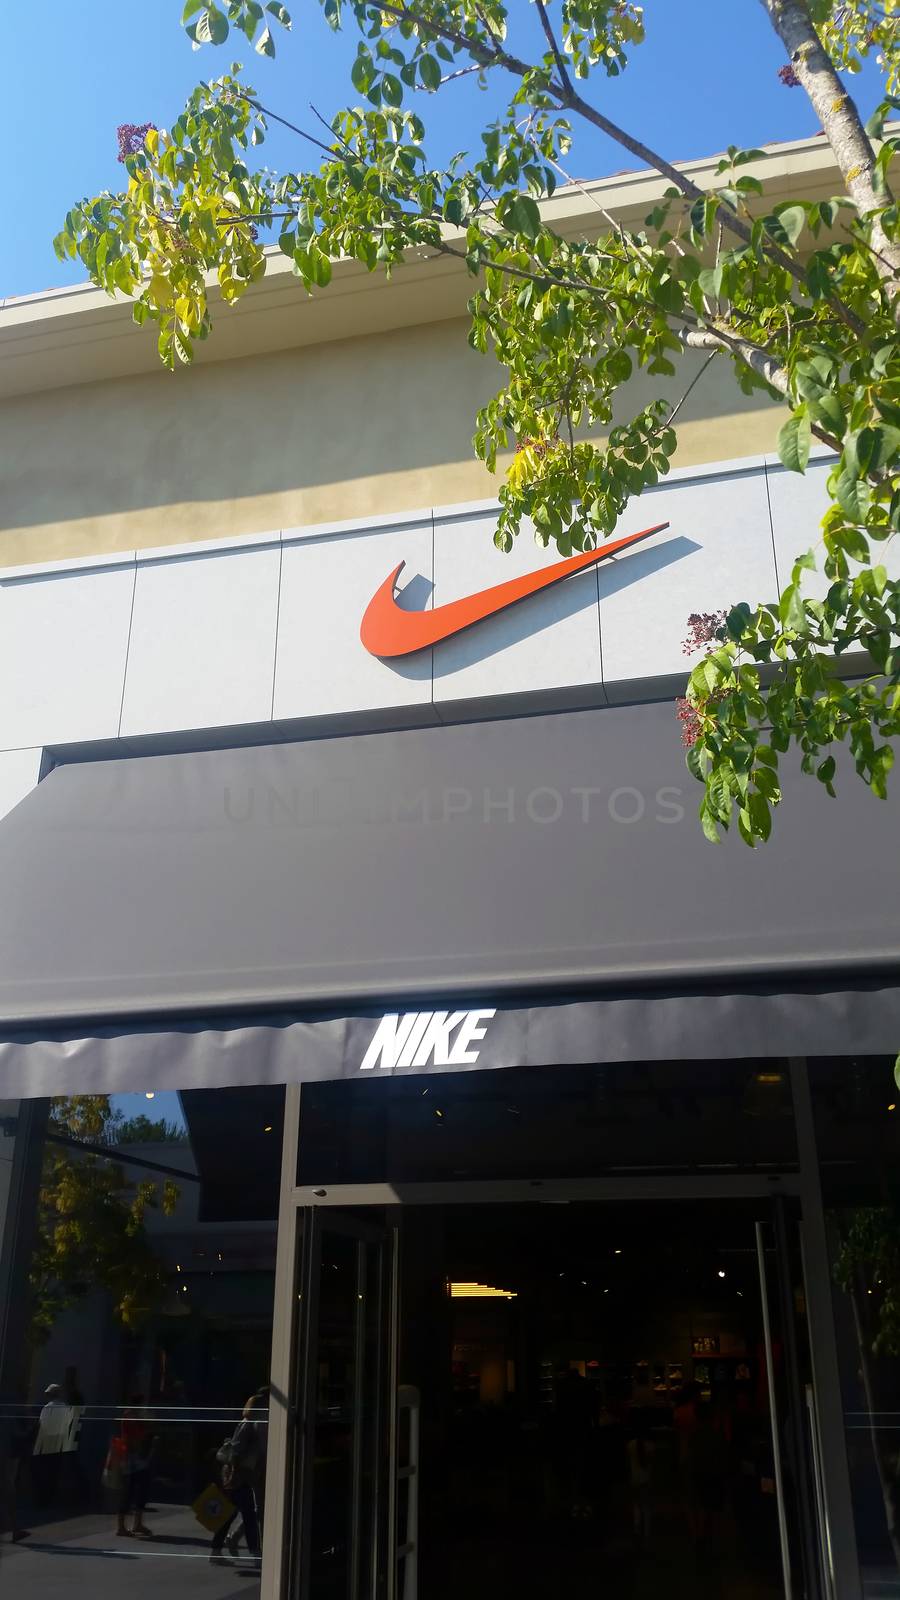 Cagnes-sur-Mer, France - September 25, 2016: Entrance of Nike Store in the City Center of Cagnes-sur-Mer (French Riviera)